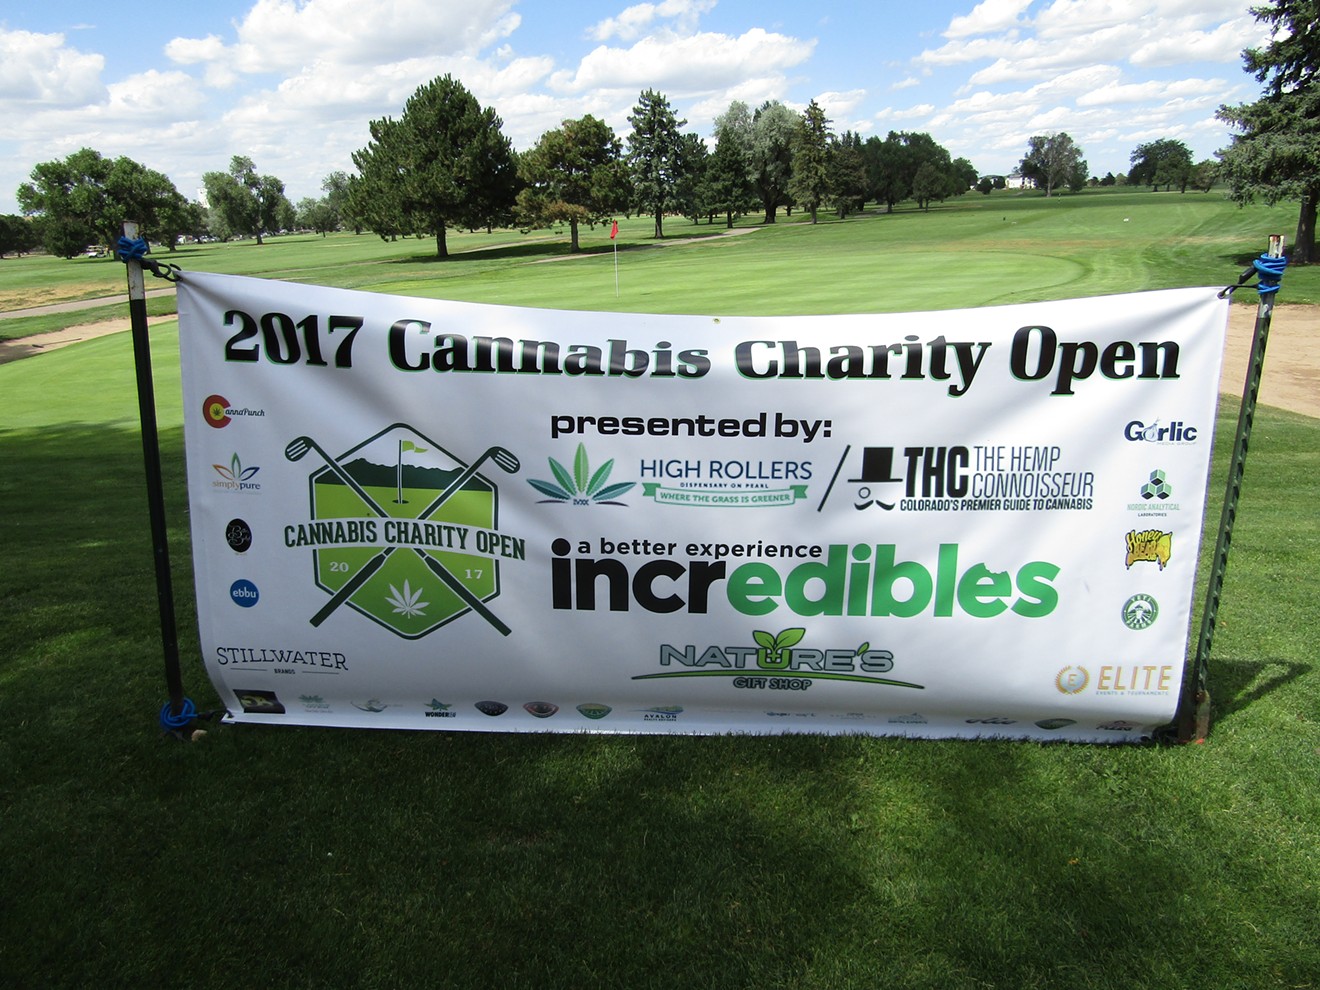 The Cannabis Charity Open celebrated its third year on July 27.